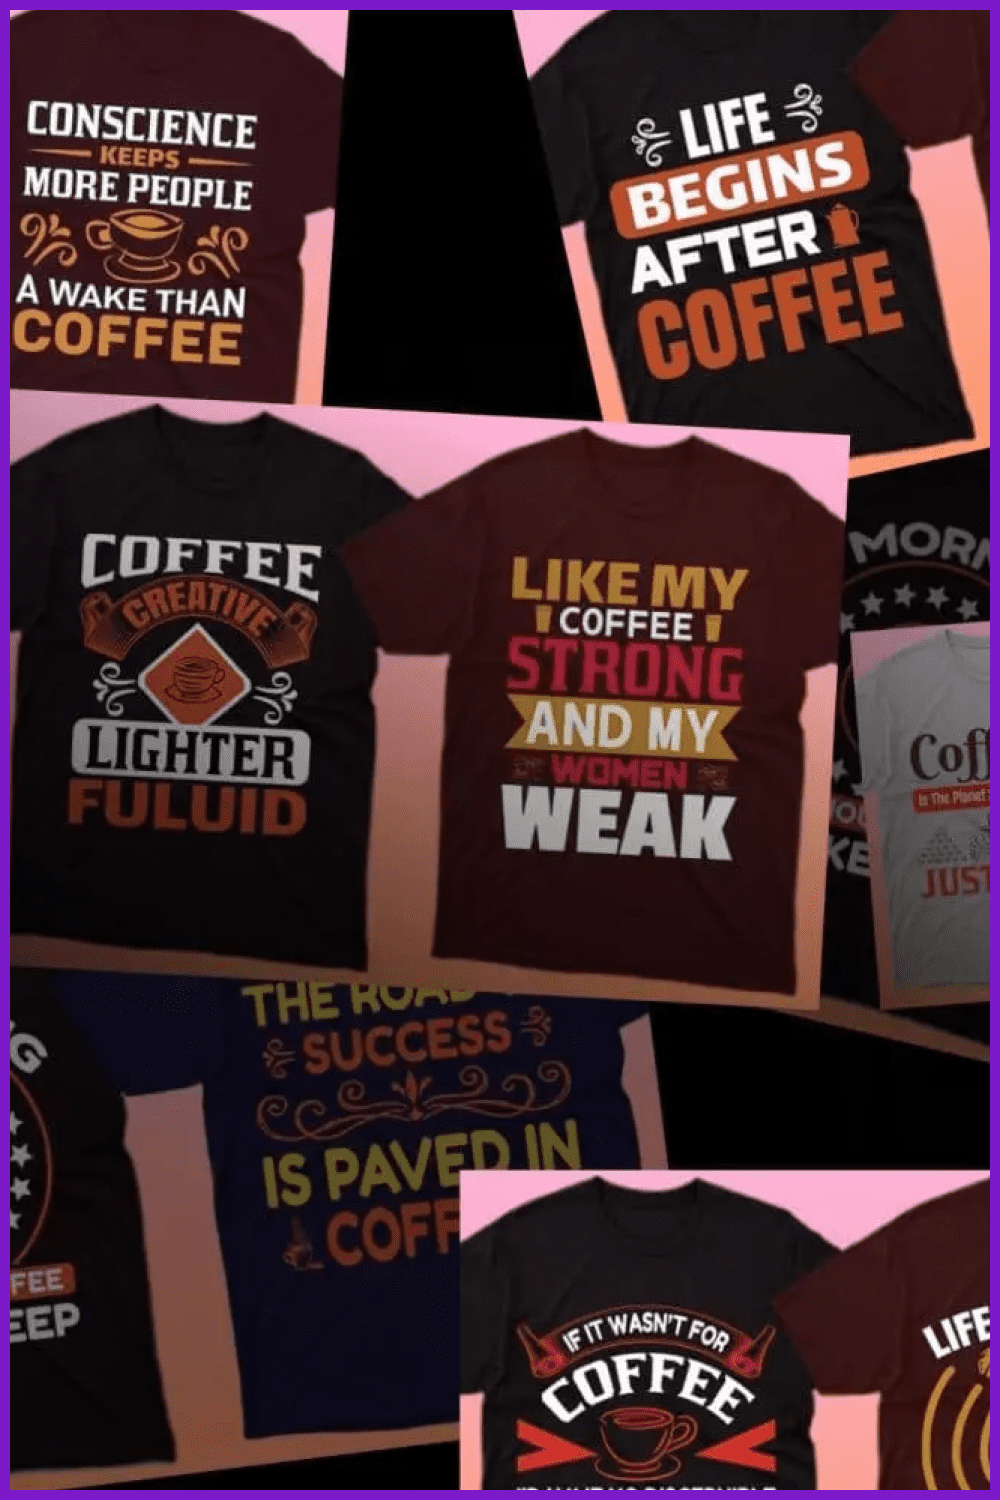 Collage of T-shirt images in dark colors with text about coffee.